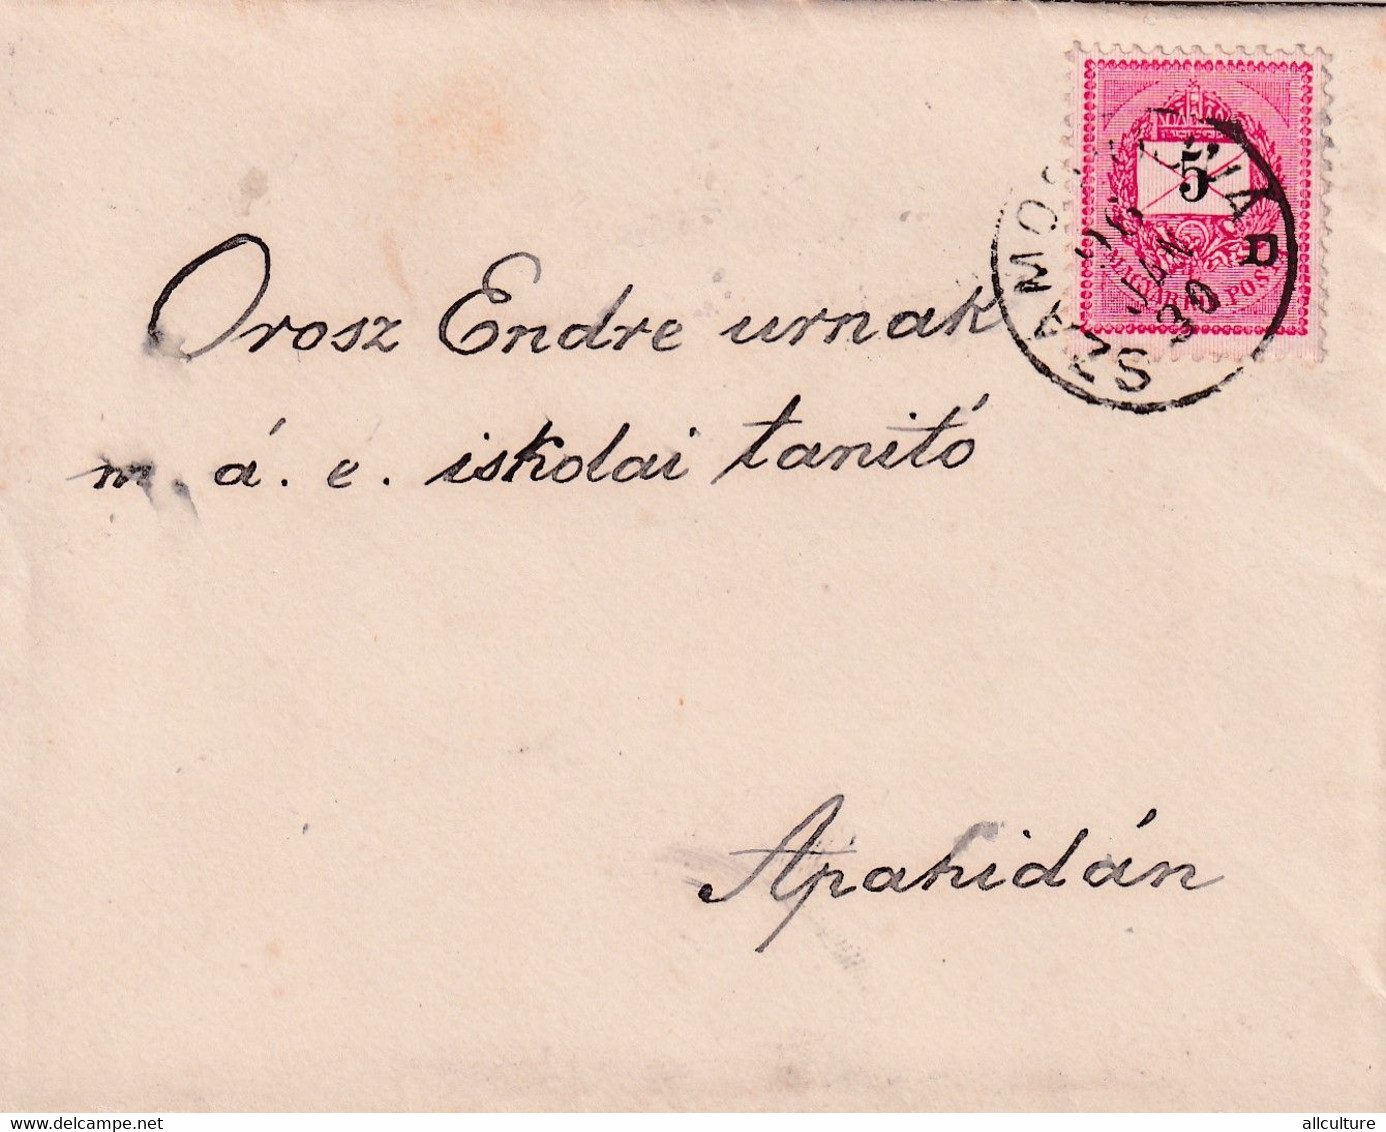 A8100- LETTER SENT TO APAHIDAN, USED STAMP ON COVER 1896 MAGYAR POSTA STAMP VINTAGE - Covers & Documents